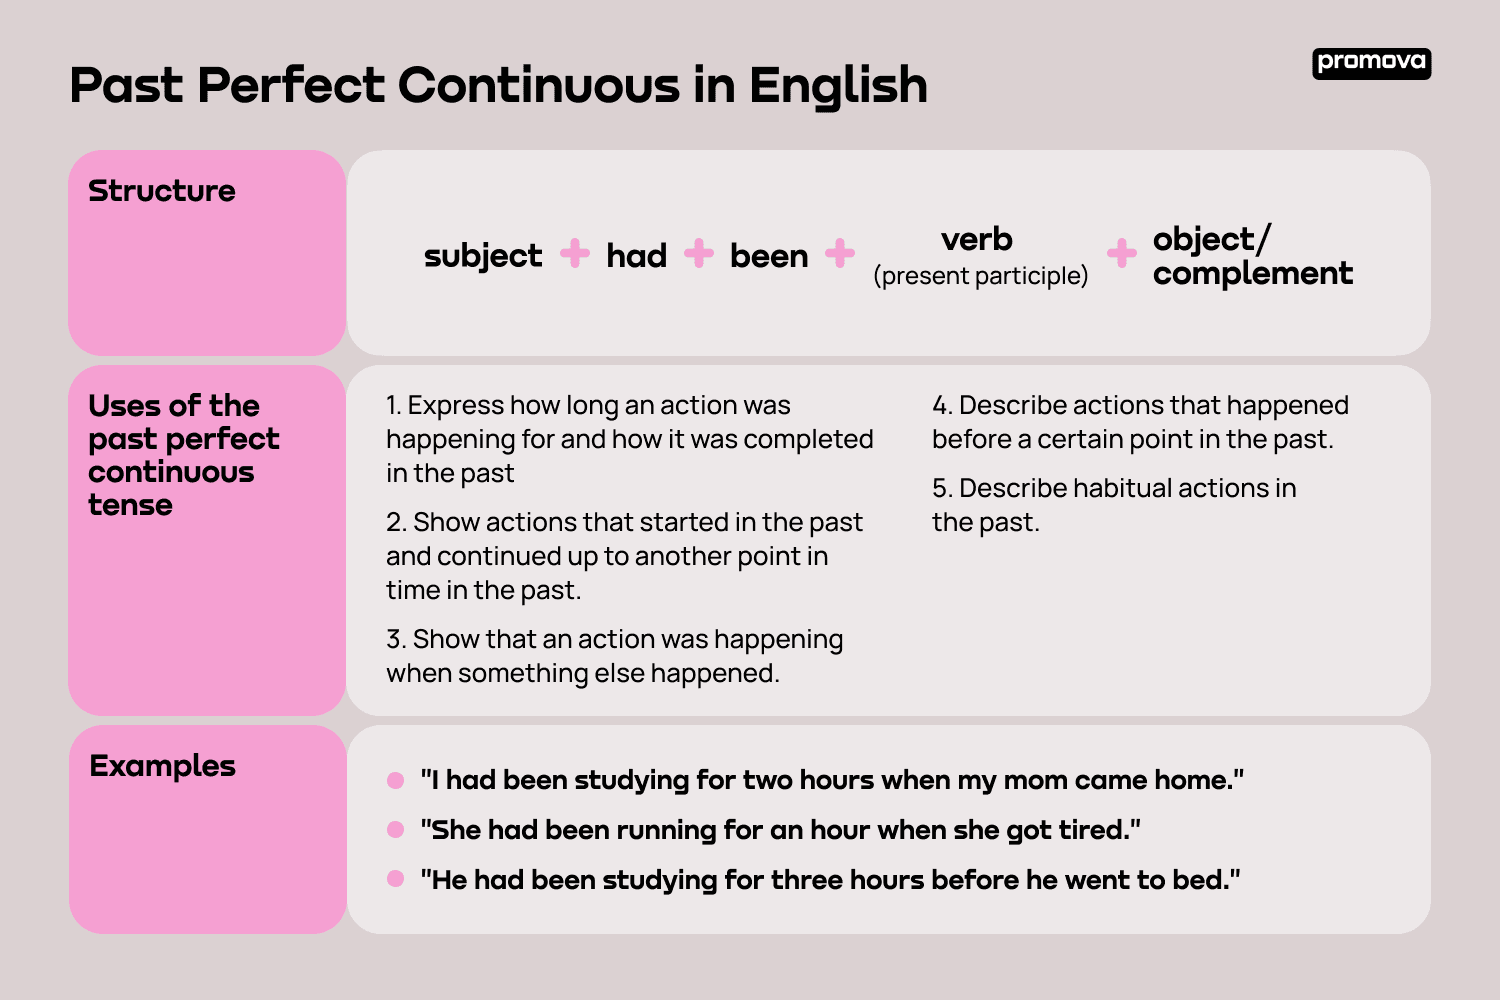 Past Perfect Continuous in English